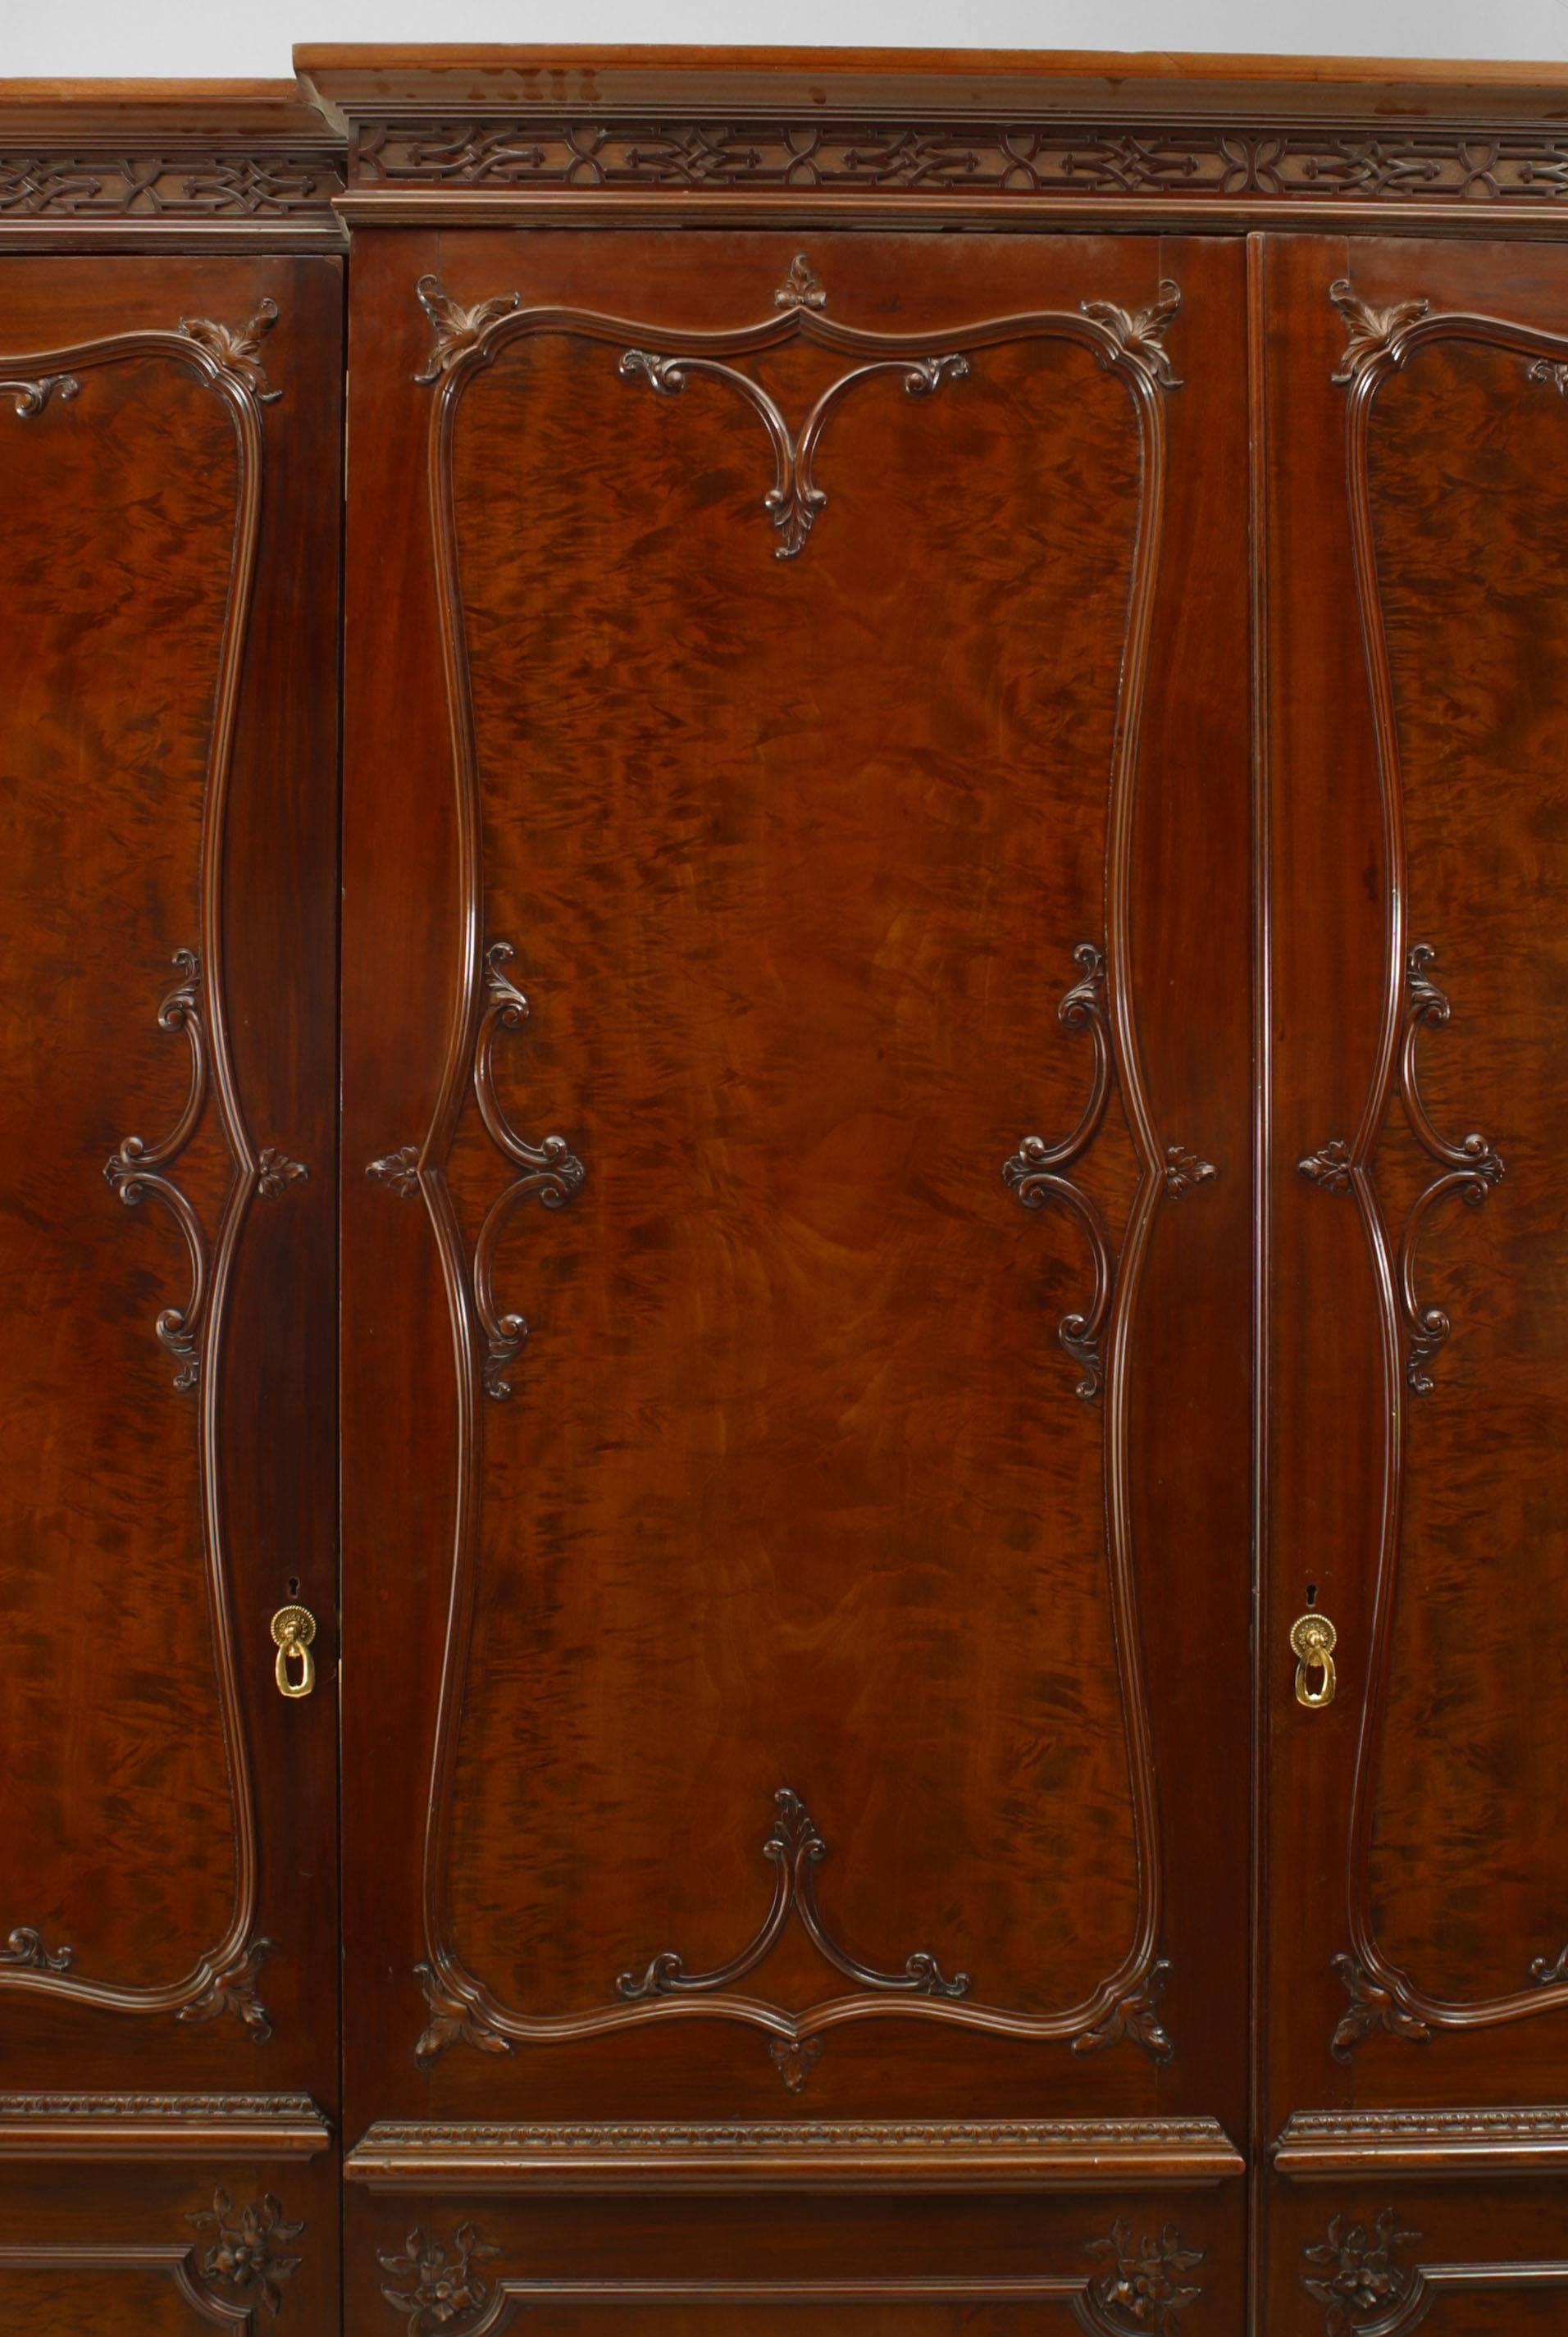 English Victorian mahogany armoire cabinet with 4 doors have a carved design framing a burl wood panel with a fretwork design cornice
